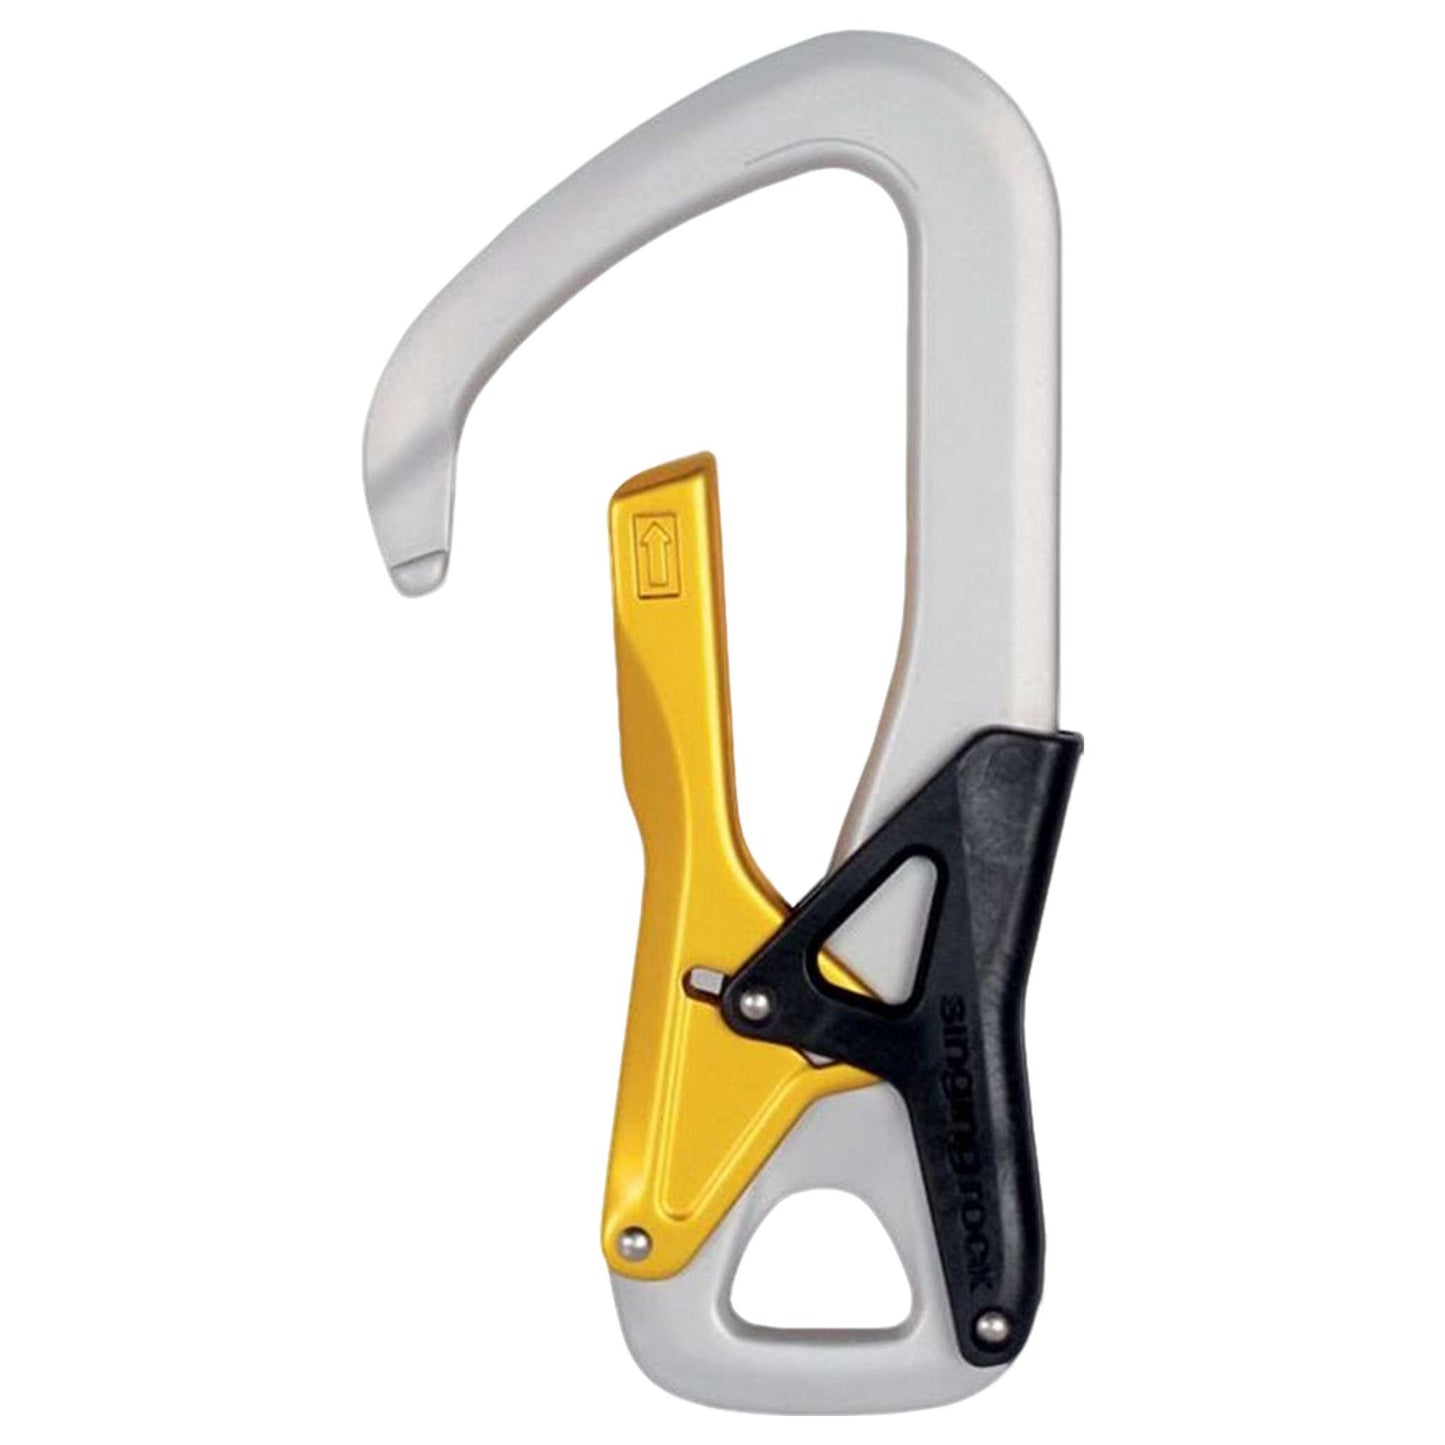 Palm Via Ferrata Carabiner - Double Action, Hot Forged, High Strength